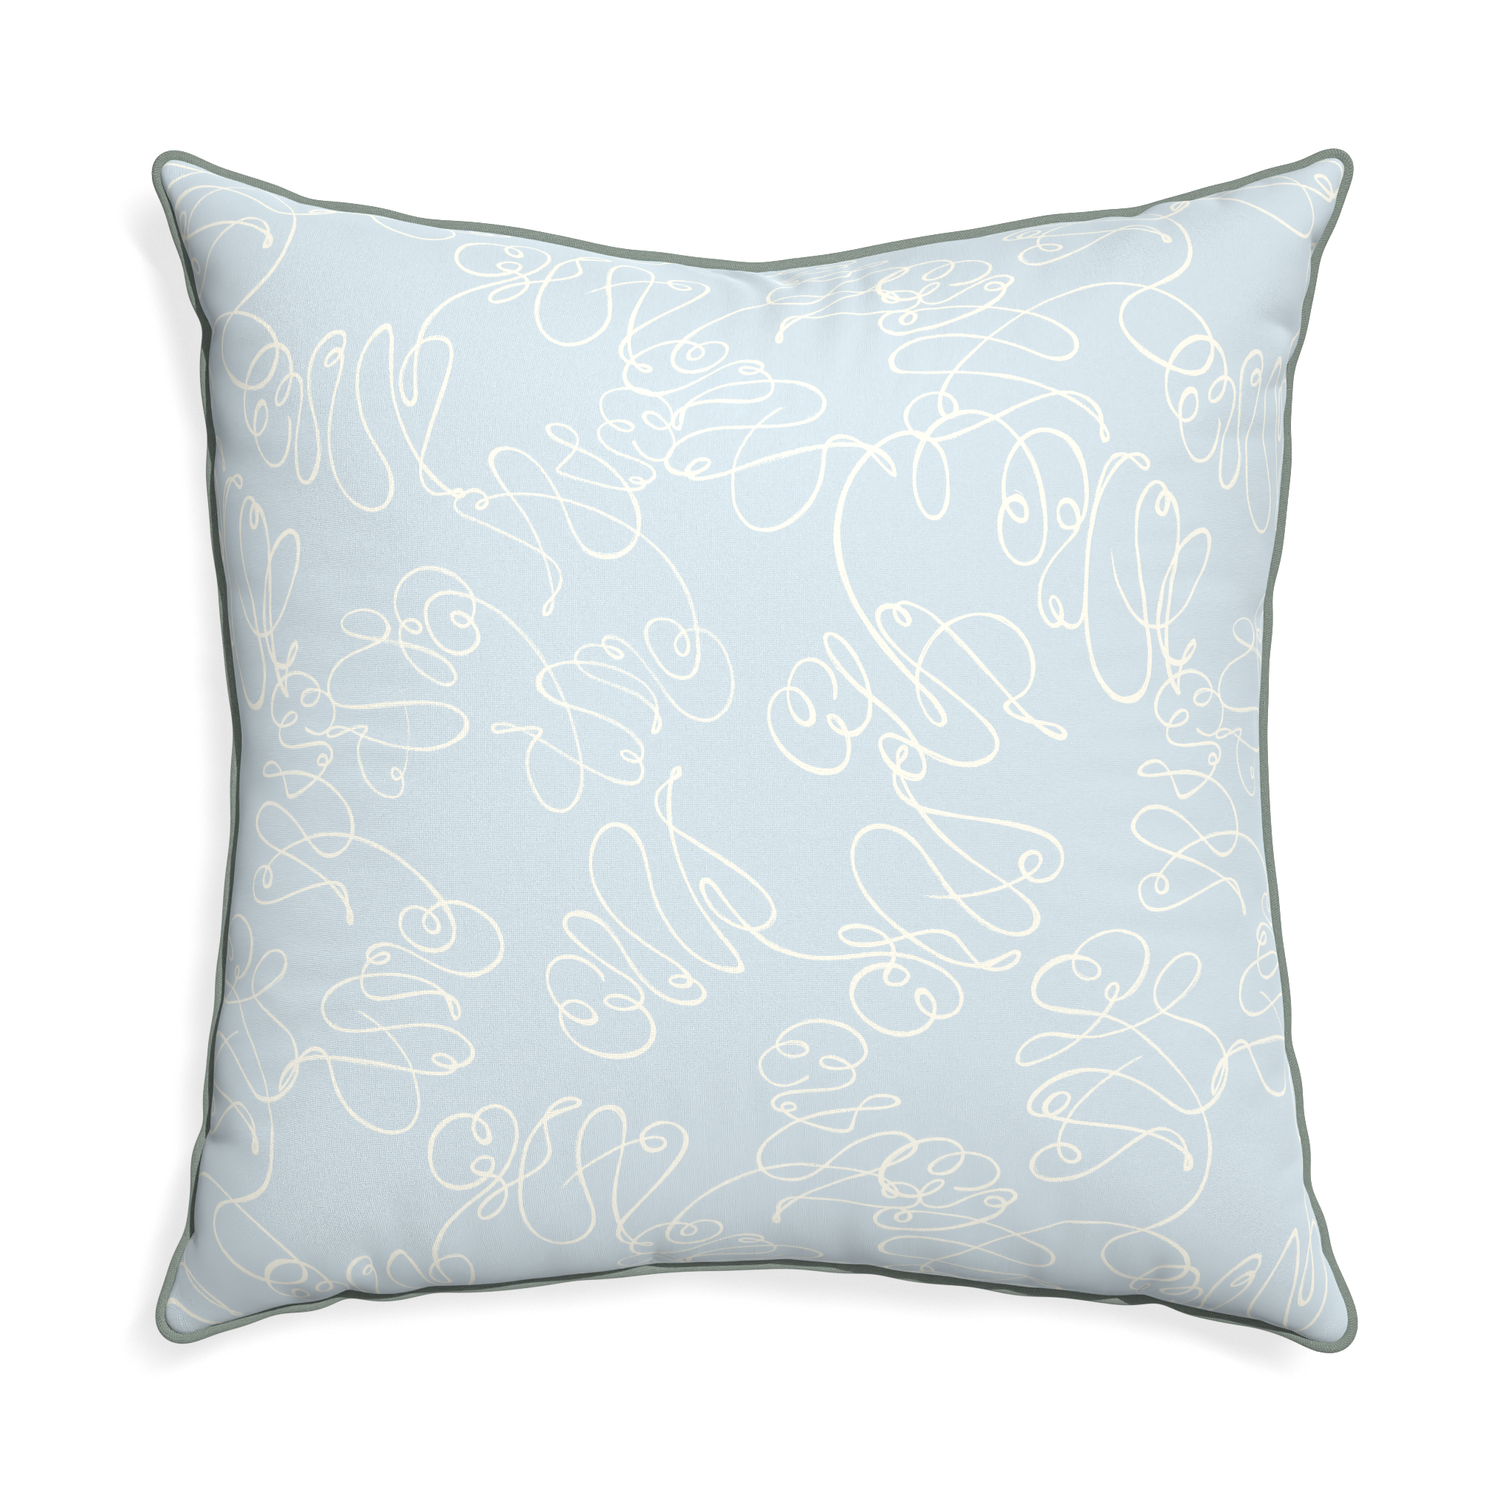 Euro-sham mirabella custom powder blue abstractpillow with sage piping on white background